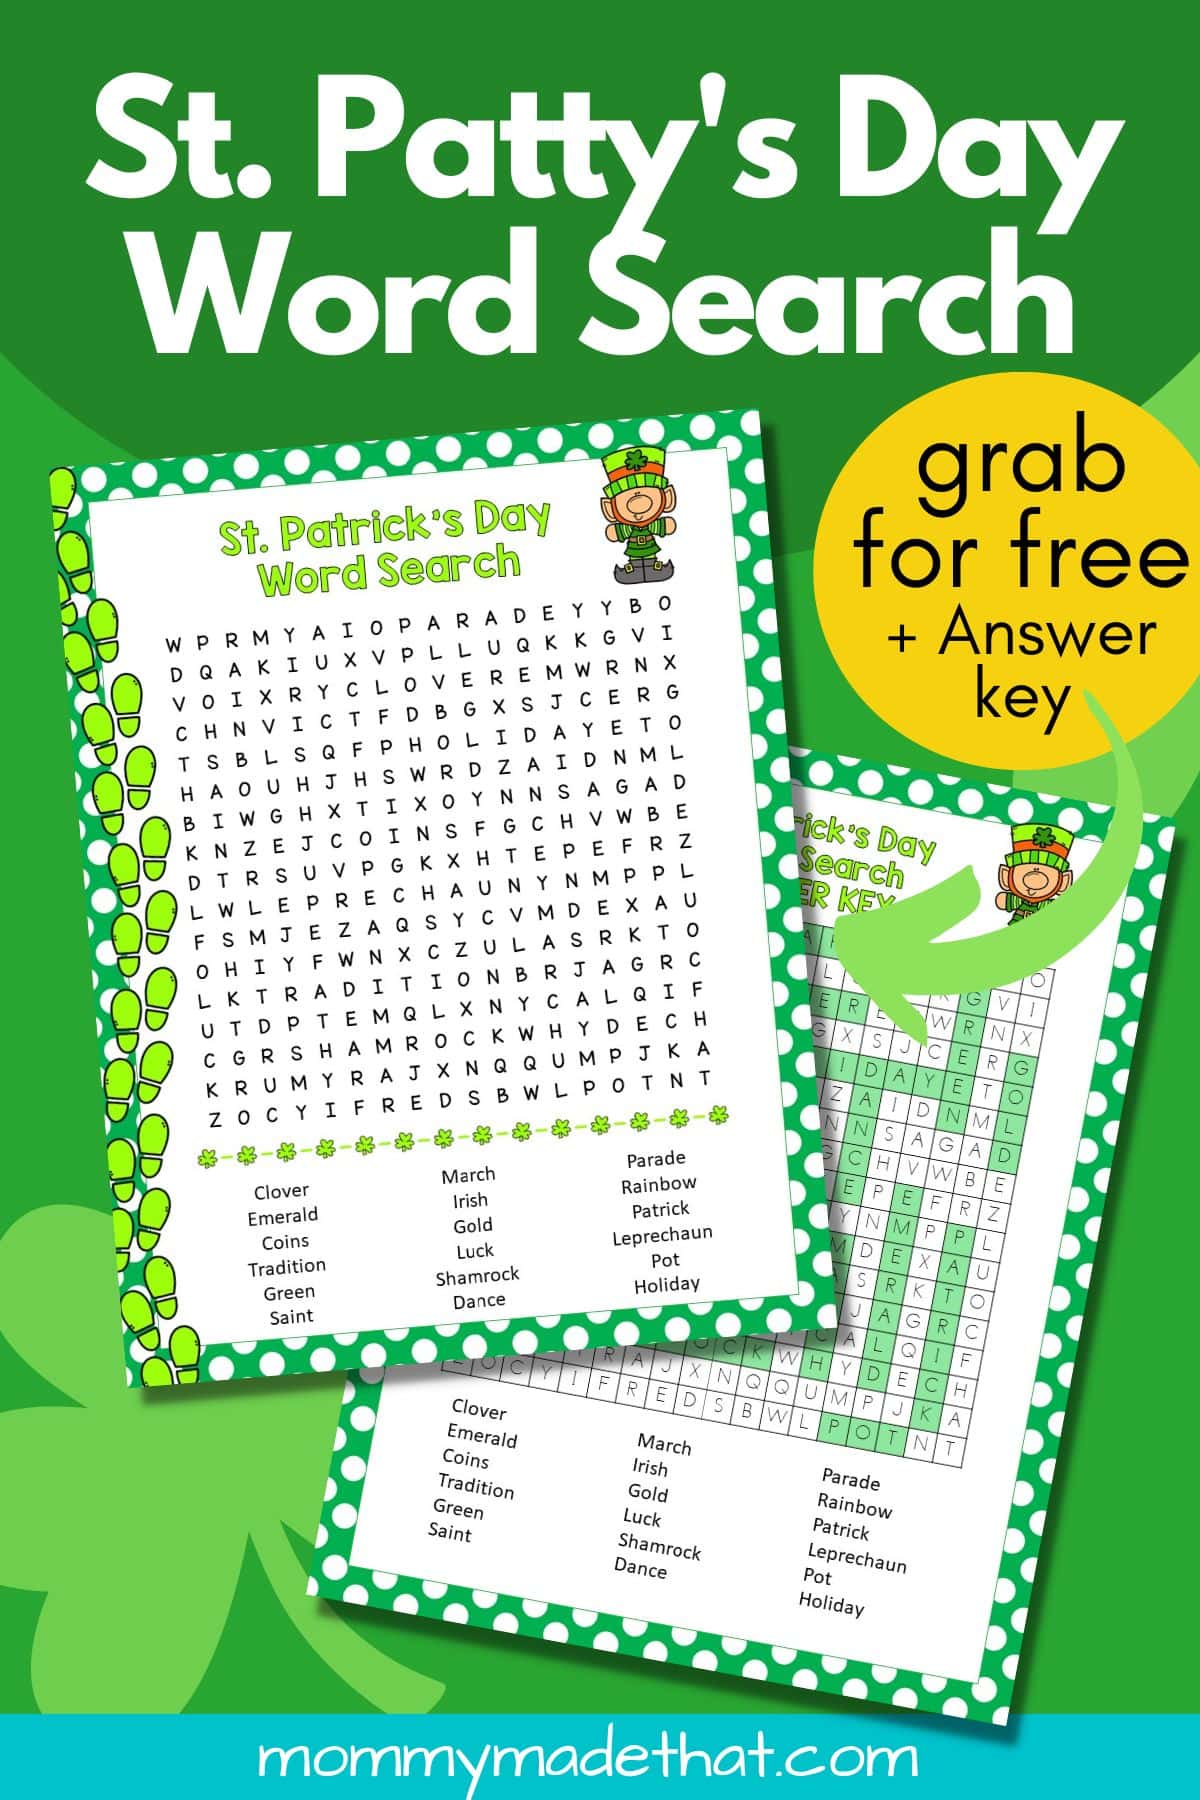 St patricks day word search and answer key